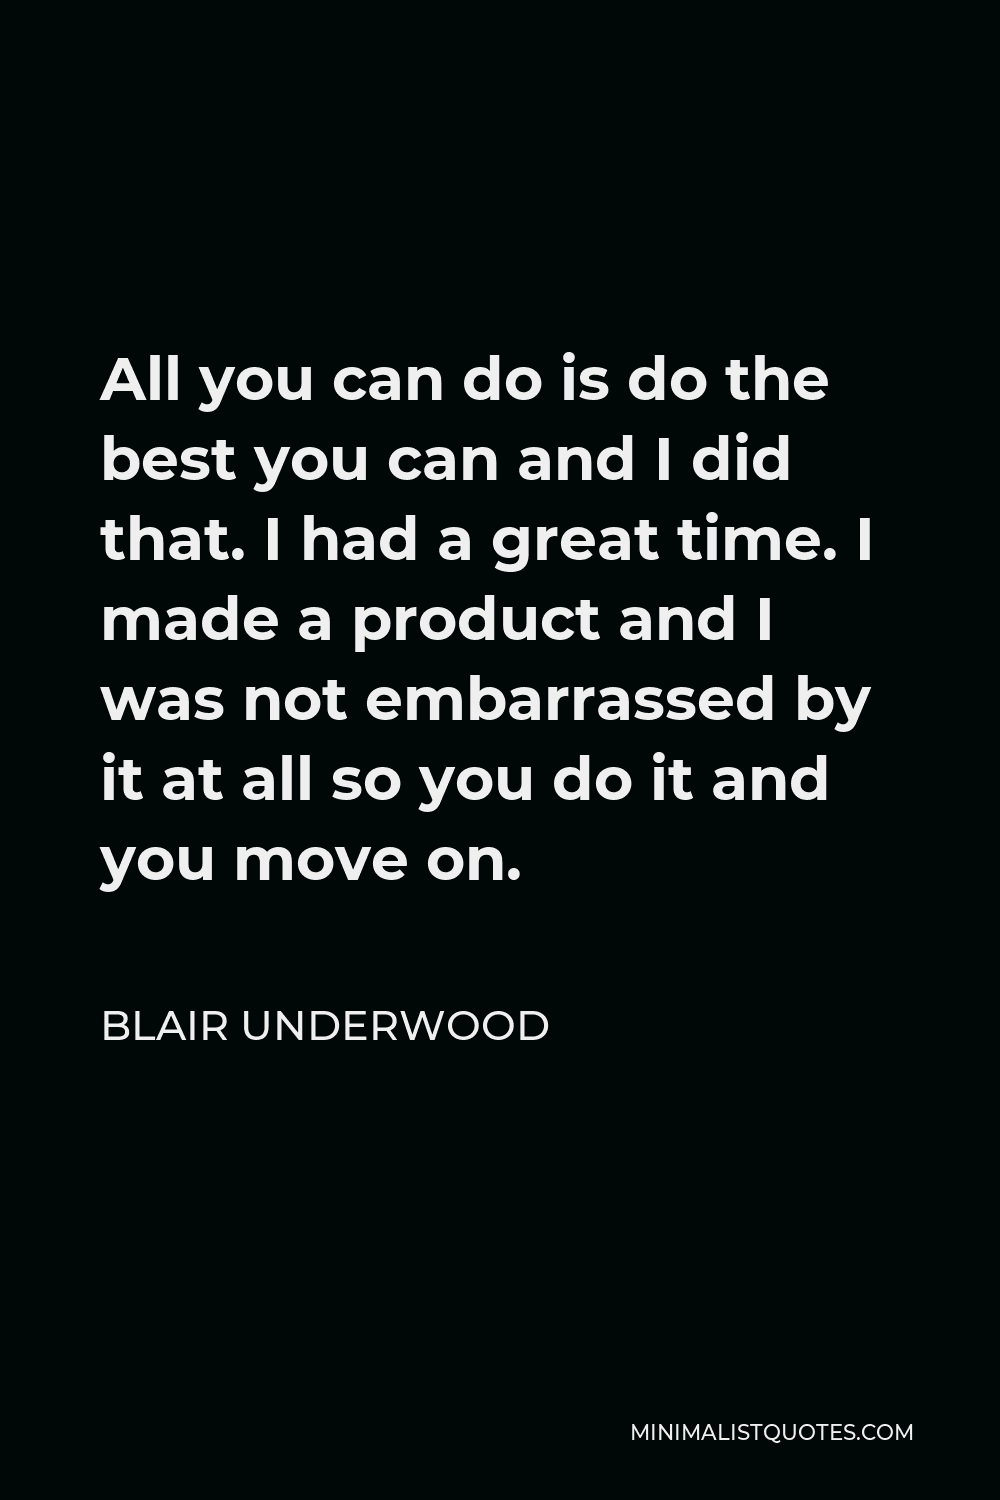 Blair Underwood Quote - All you can do is do the best you can and I did that. I had a great time. I made a product and I was not embarrassed by it at all so you do it and you move on.